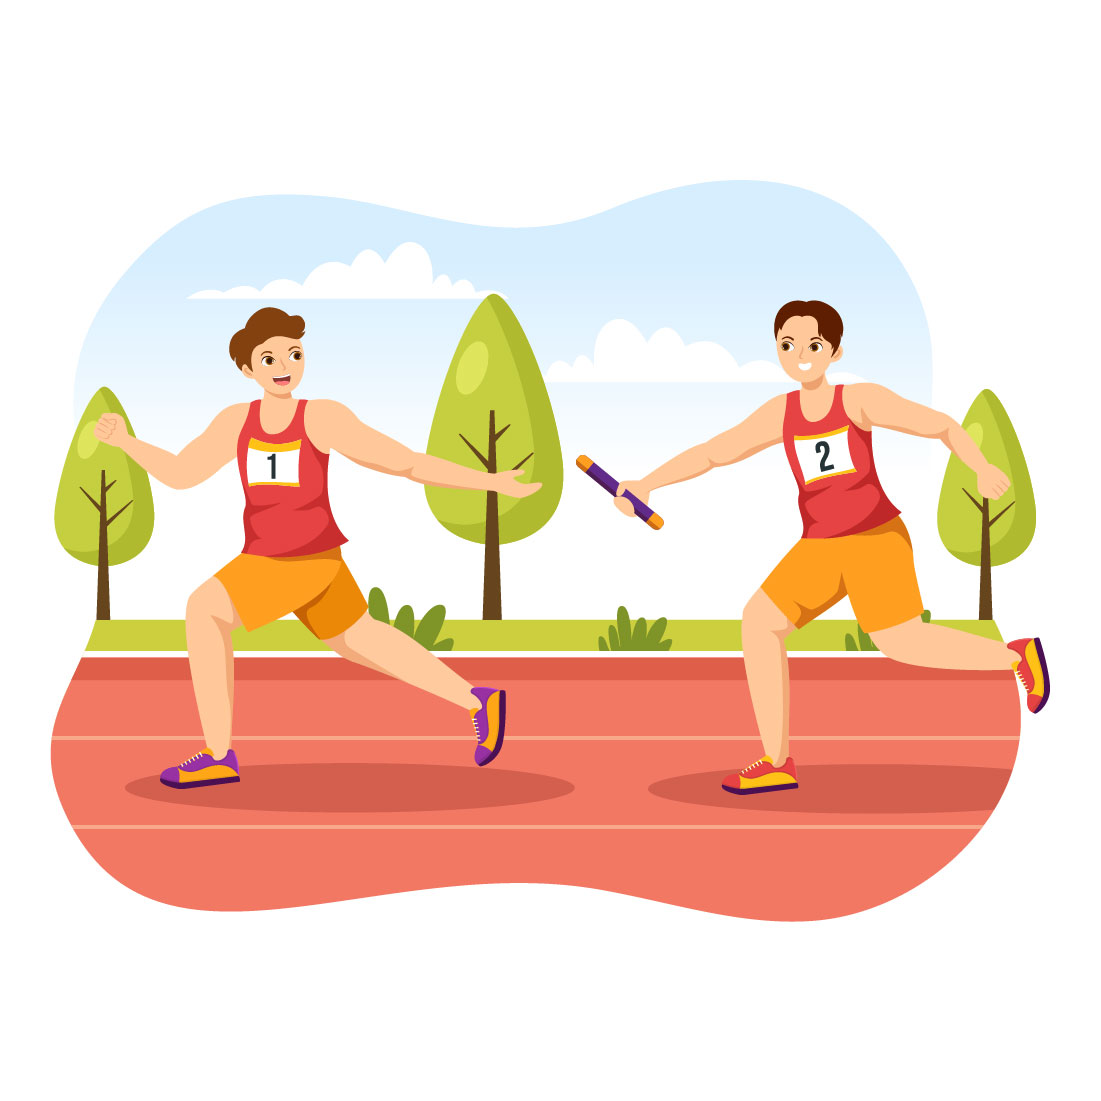 Relay Race Sports Illustration cover image.